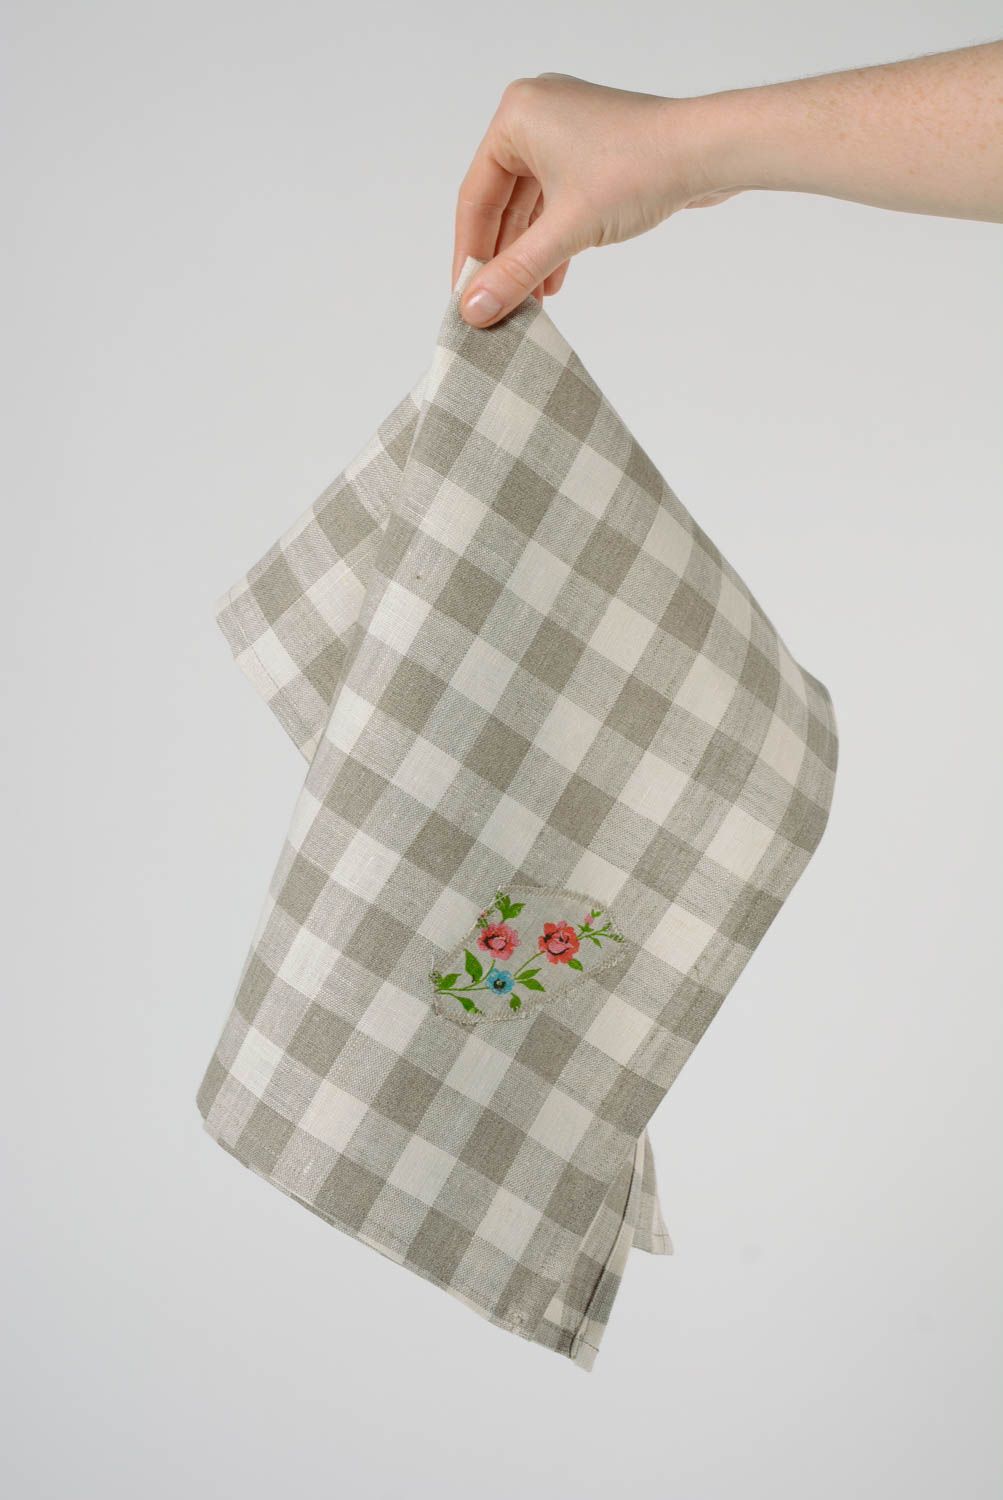 Handmade large kitchen towel sewn of checkered linen fabric with applique work photo 4